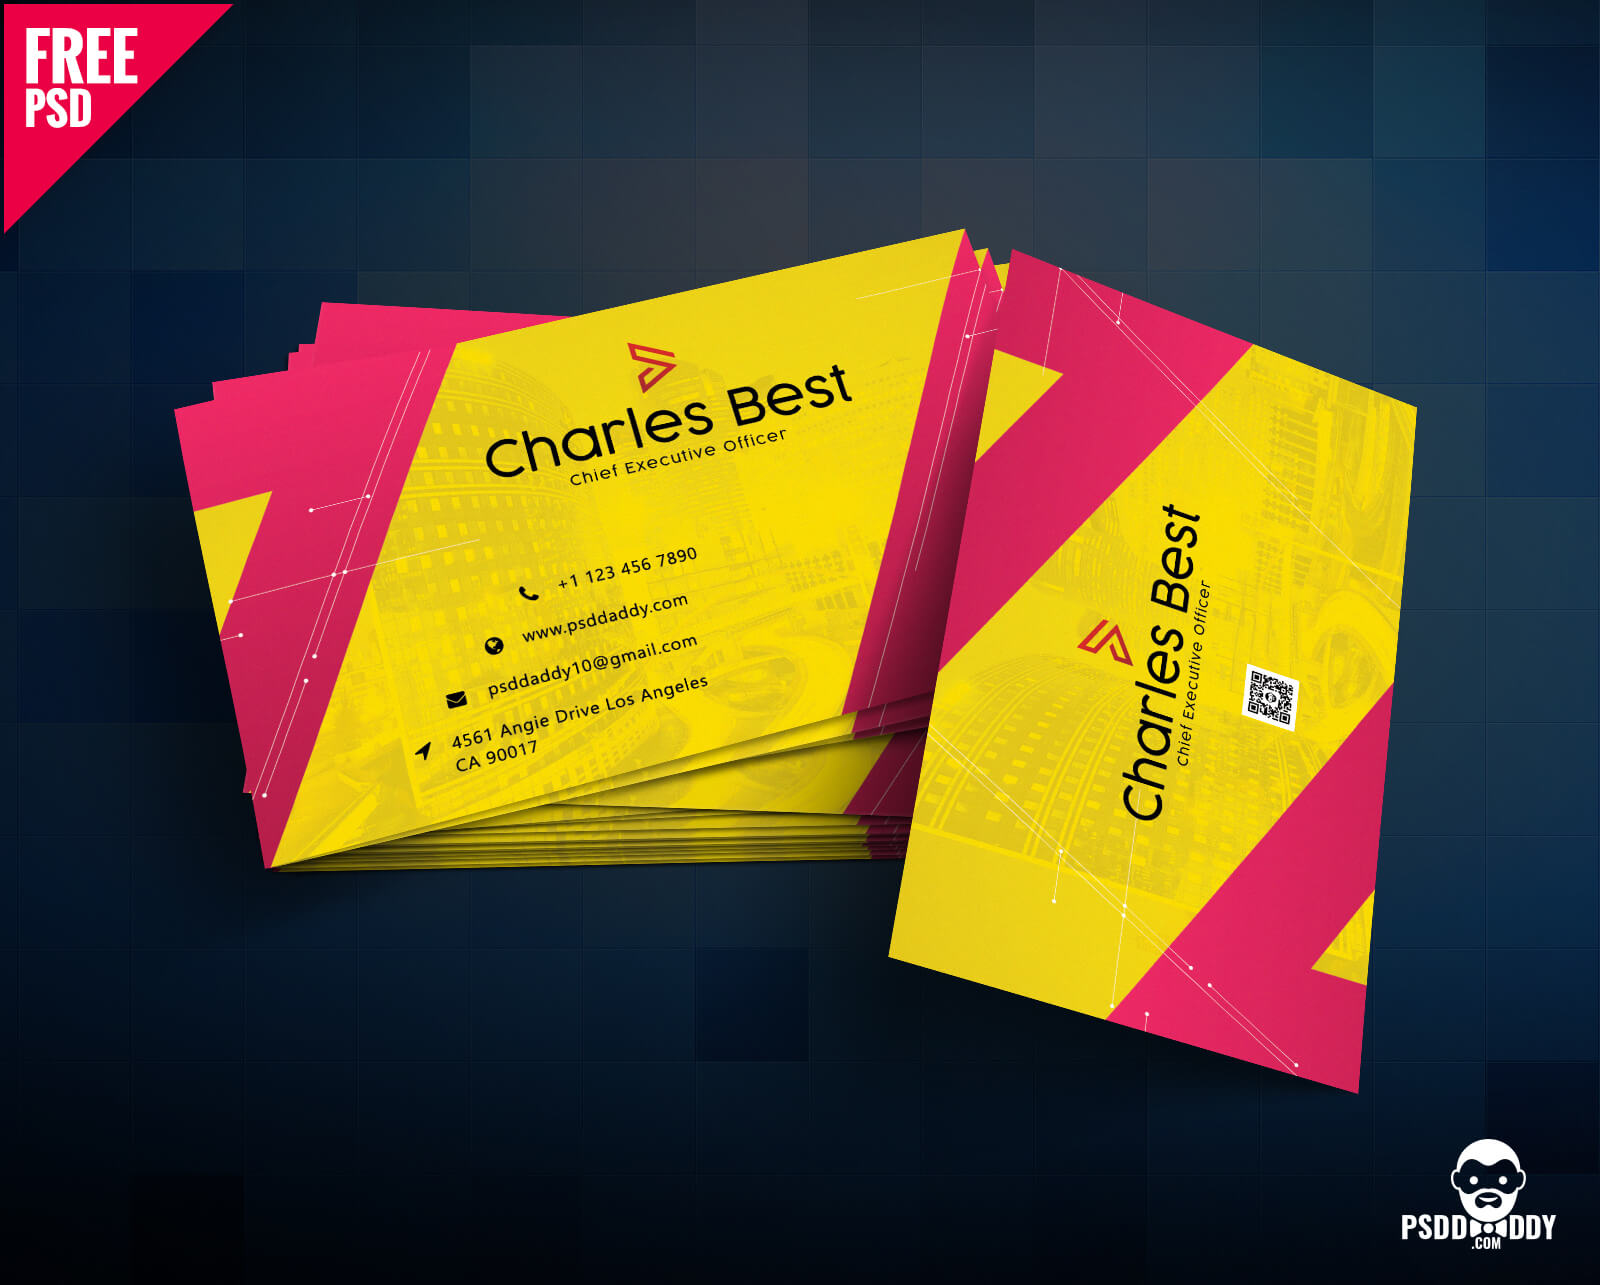 Download] Creative Business Card Free Psd | Psddaddy For Business Card Size Template Photoshop